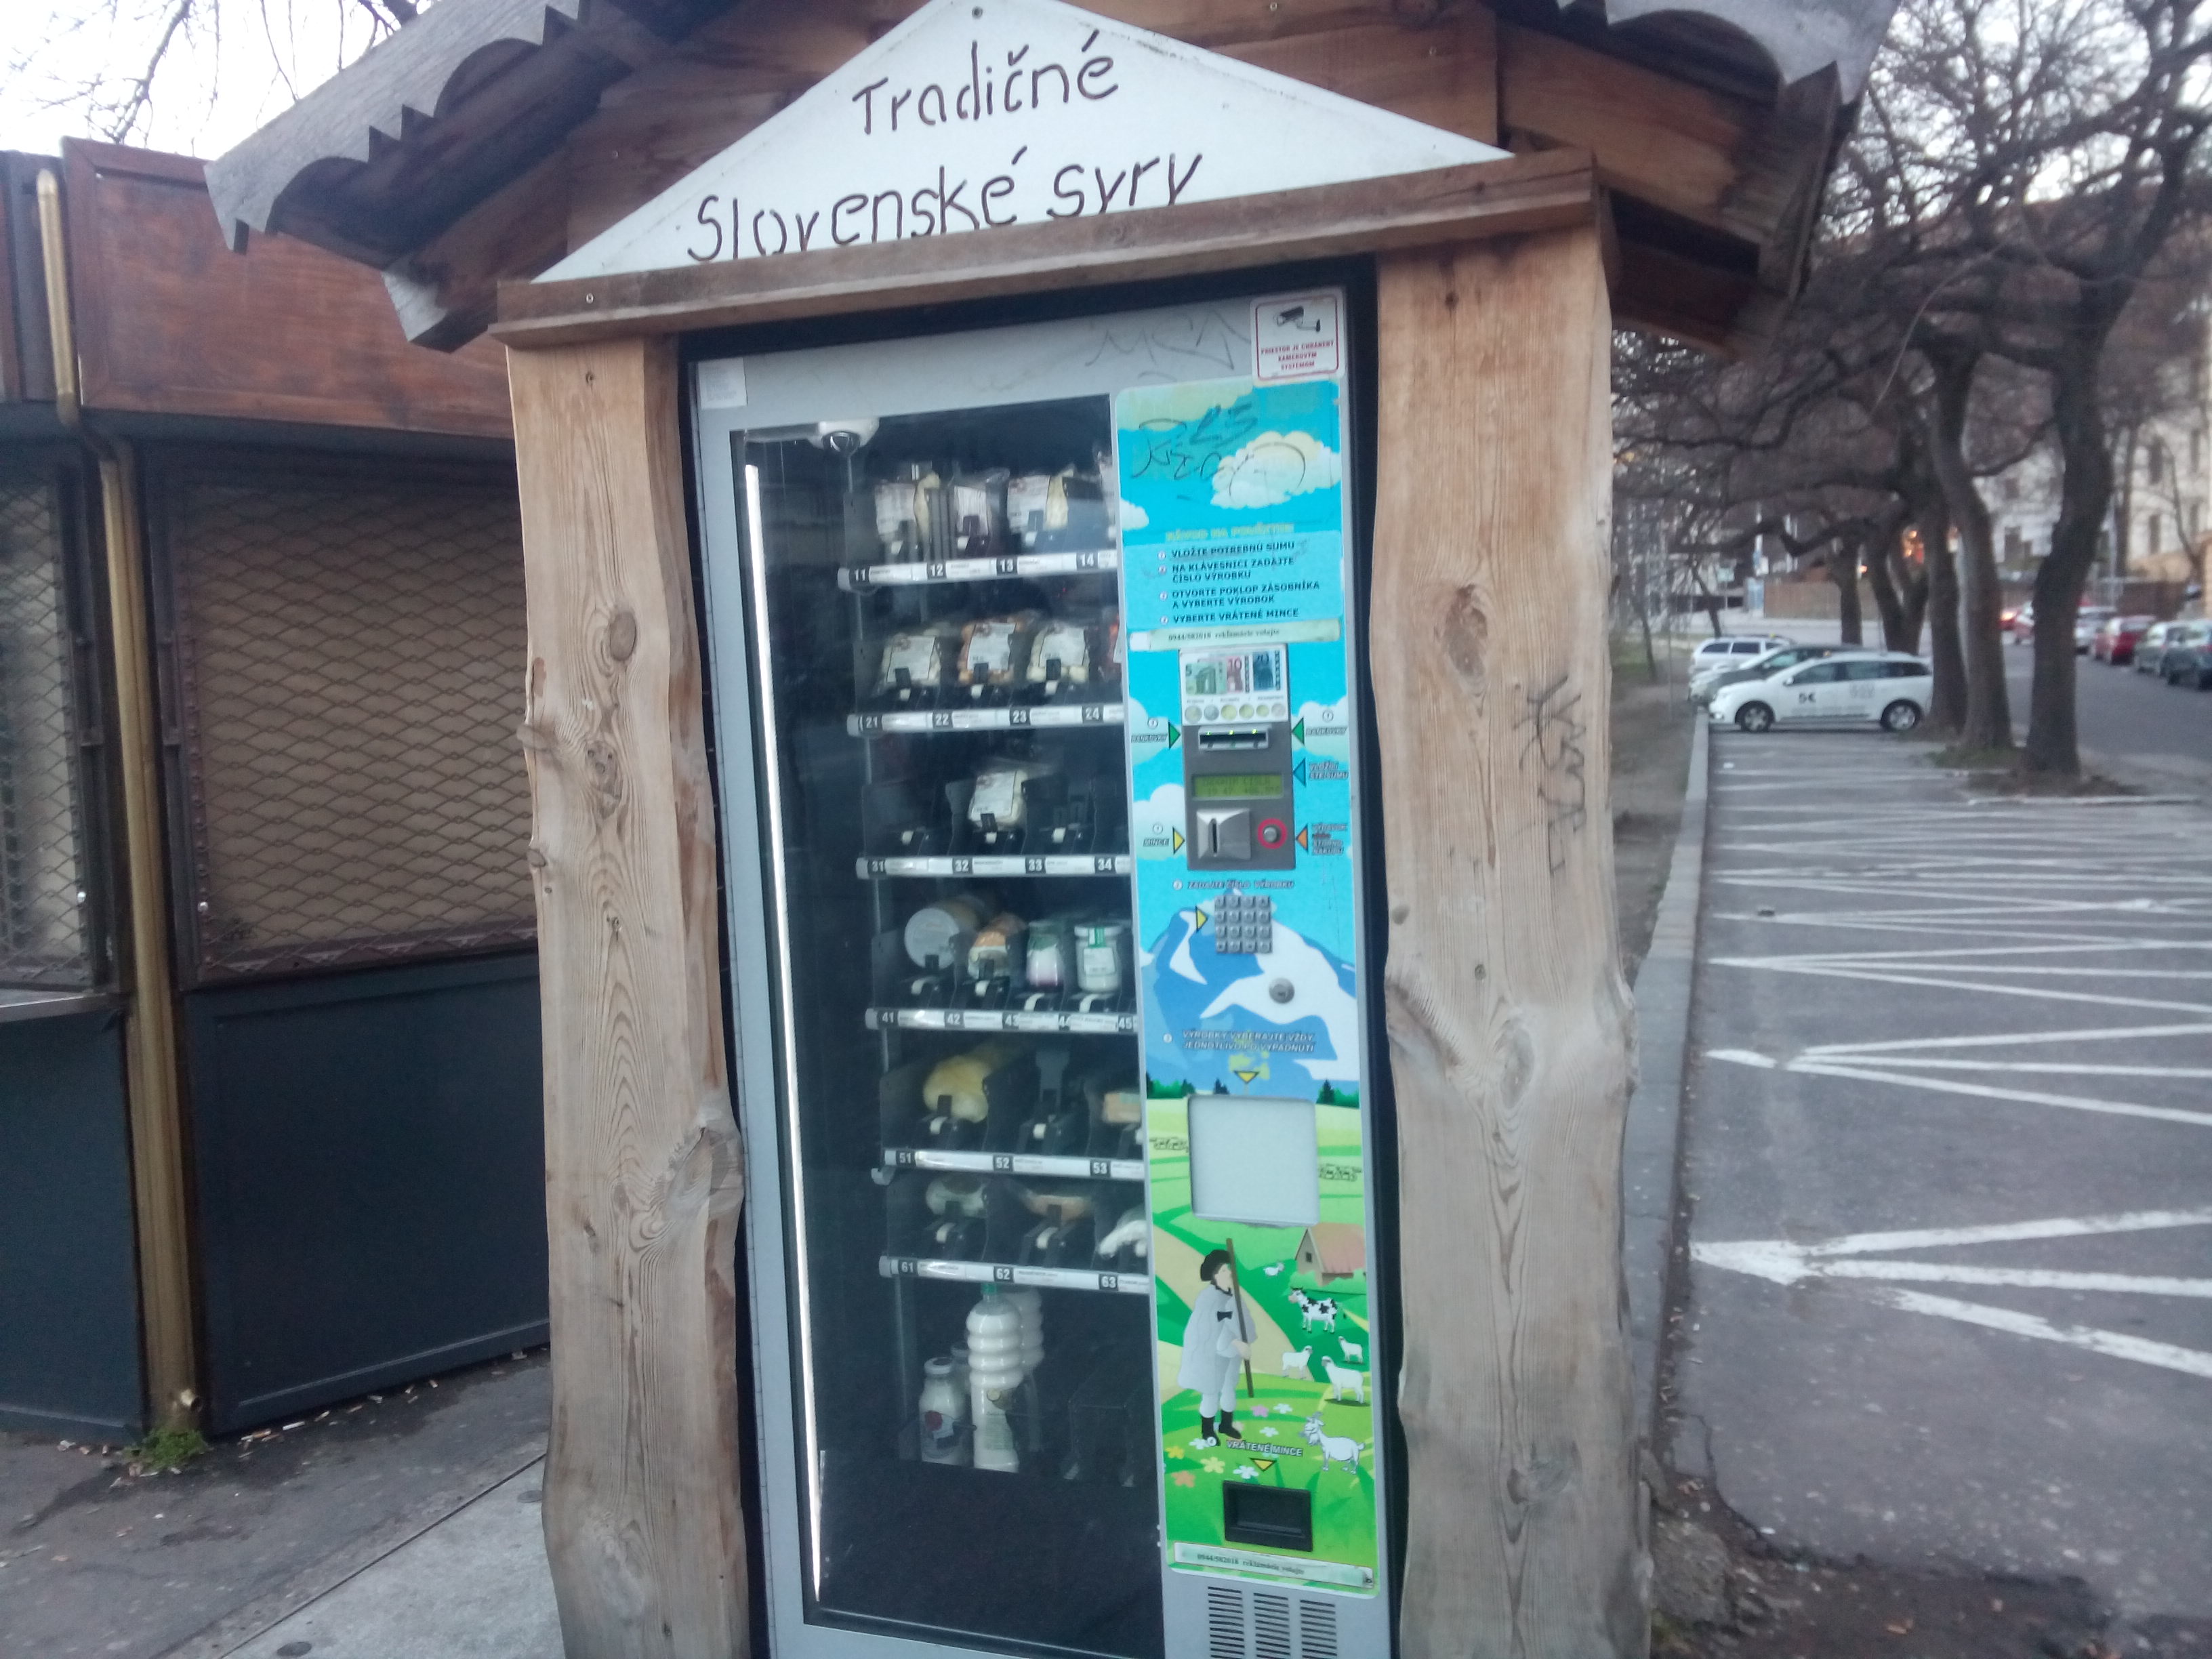 A wooden frame around a modern vending machine, containing traditional Slovakian cheeses